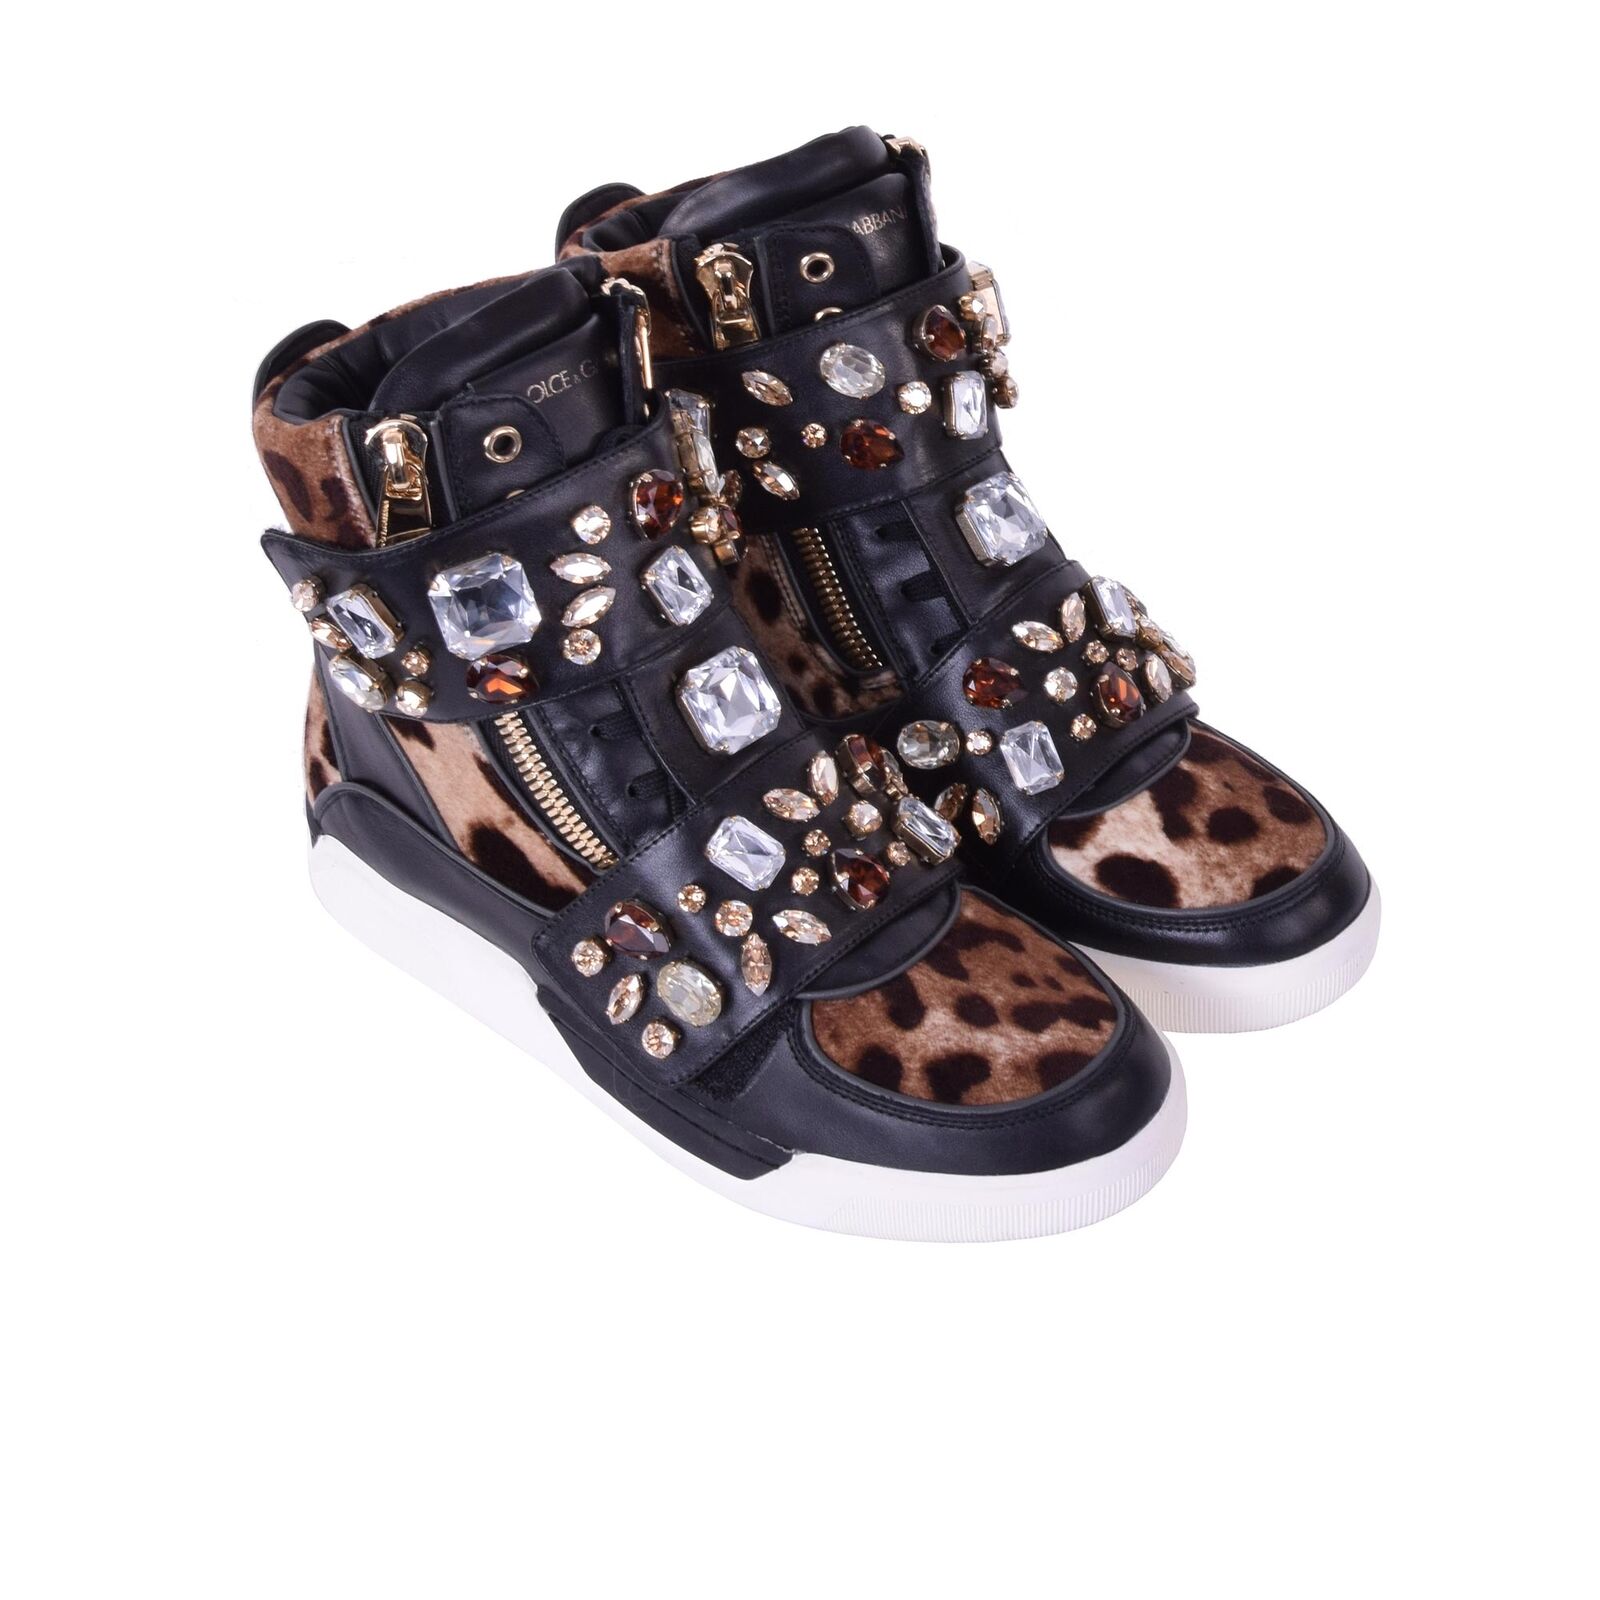 DOLCE & GABBANA Crystals Leopard High-Top Zip Sneakers Shoes Black 